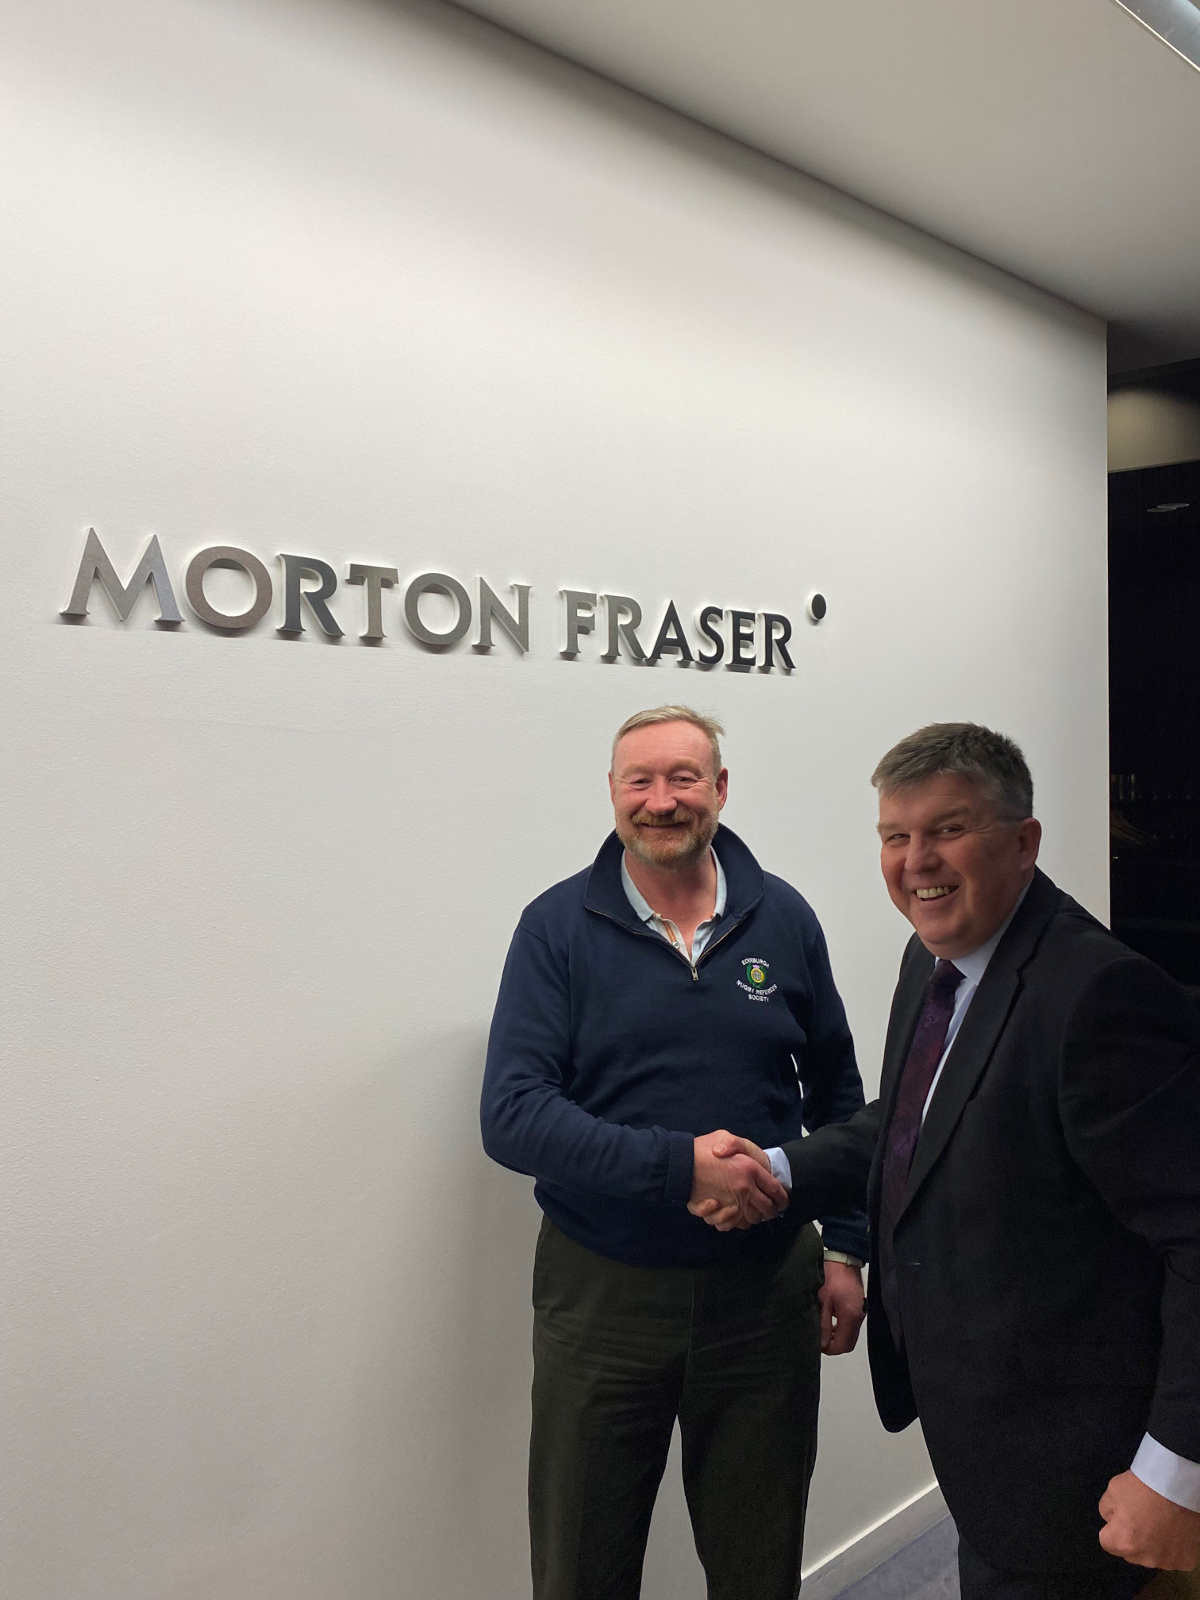 Morton Fraser’s Iain Young helps club become youth sports charity